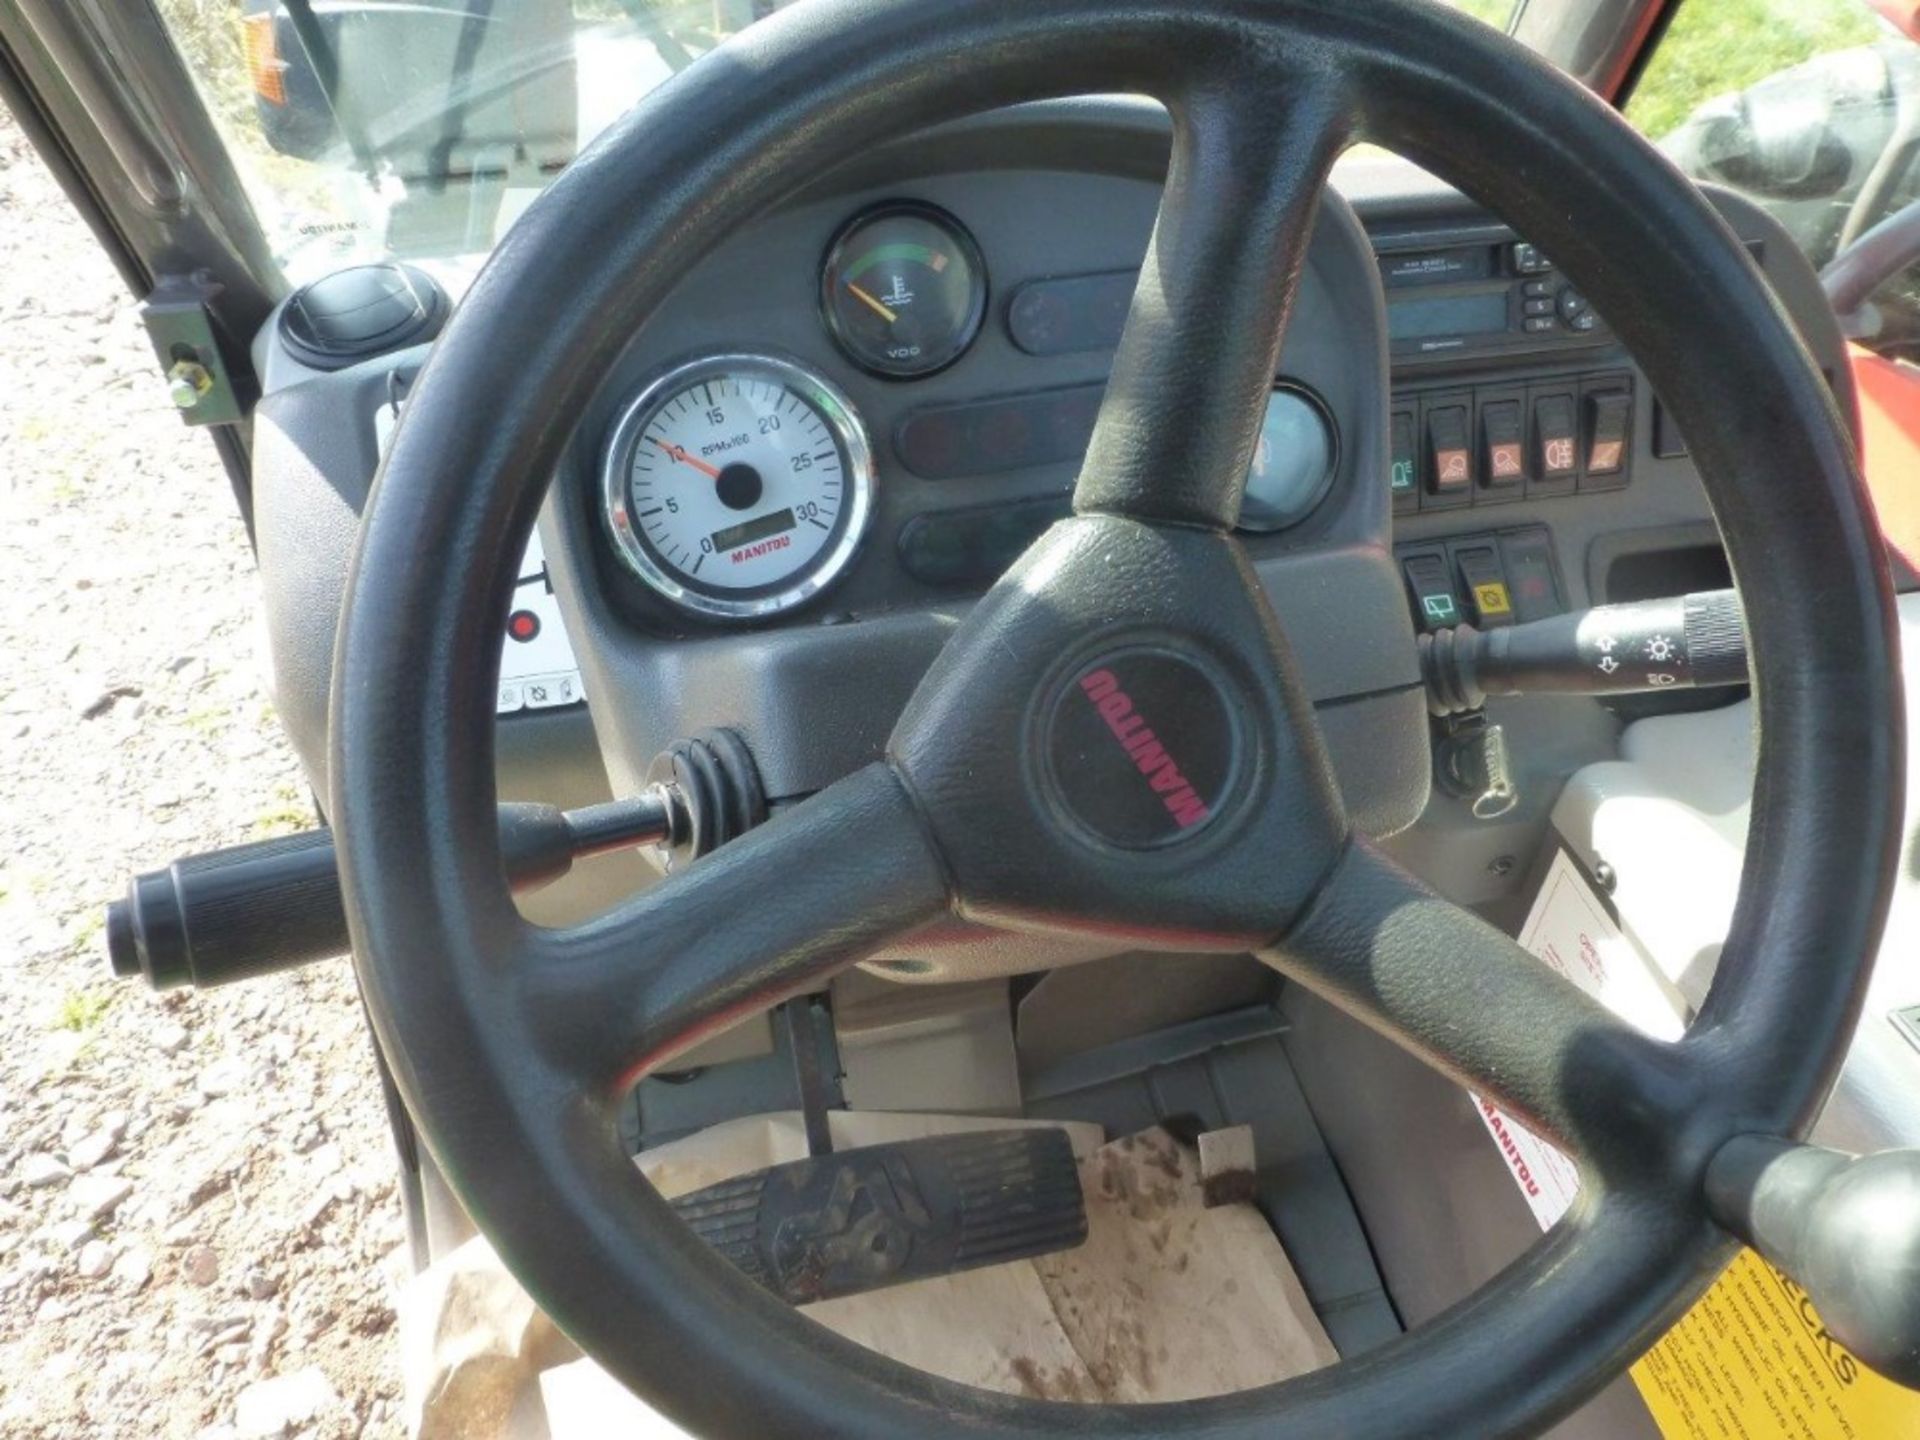 Manitou 634-120 LSU Turbo CRC Powershift with Air Con. 05 Reg - Image 5 of 5